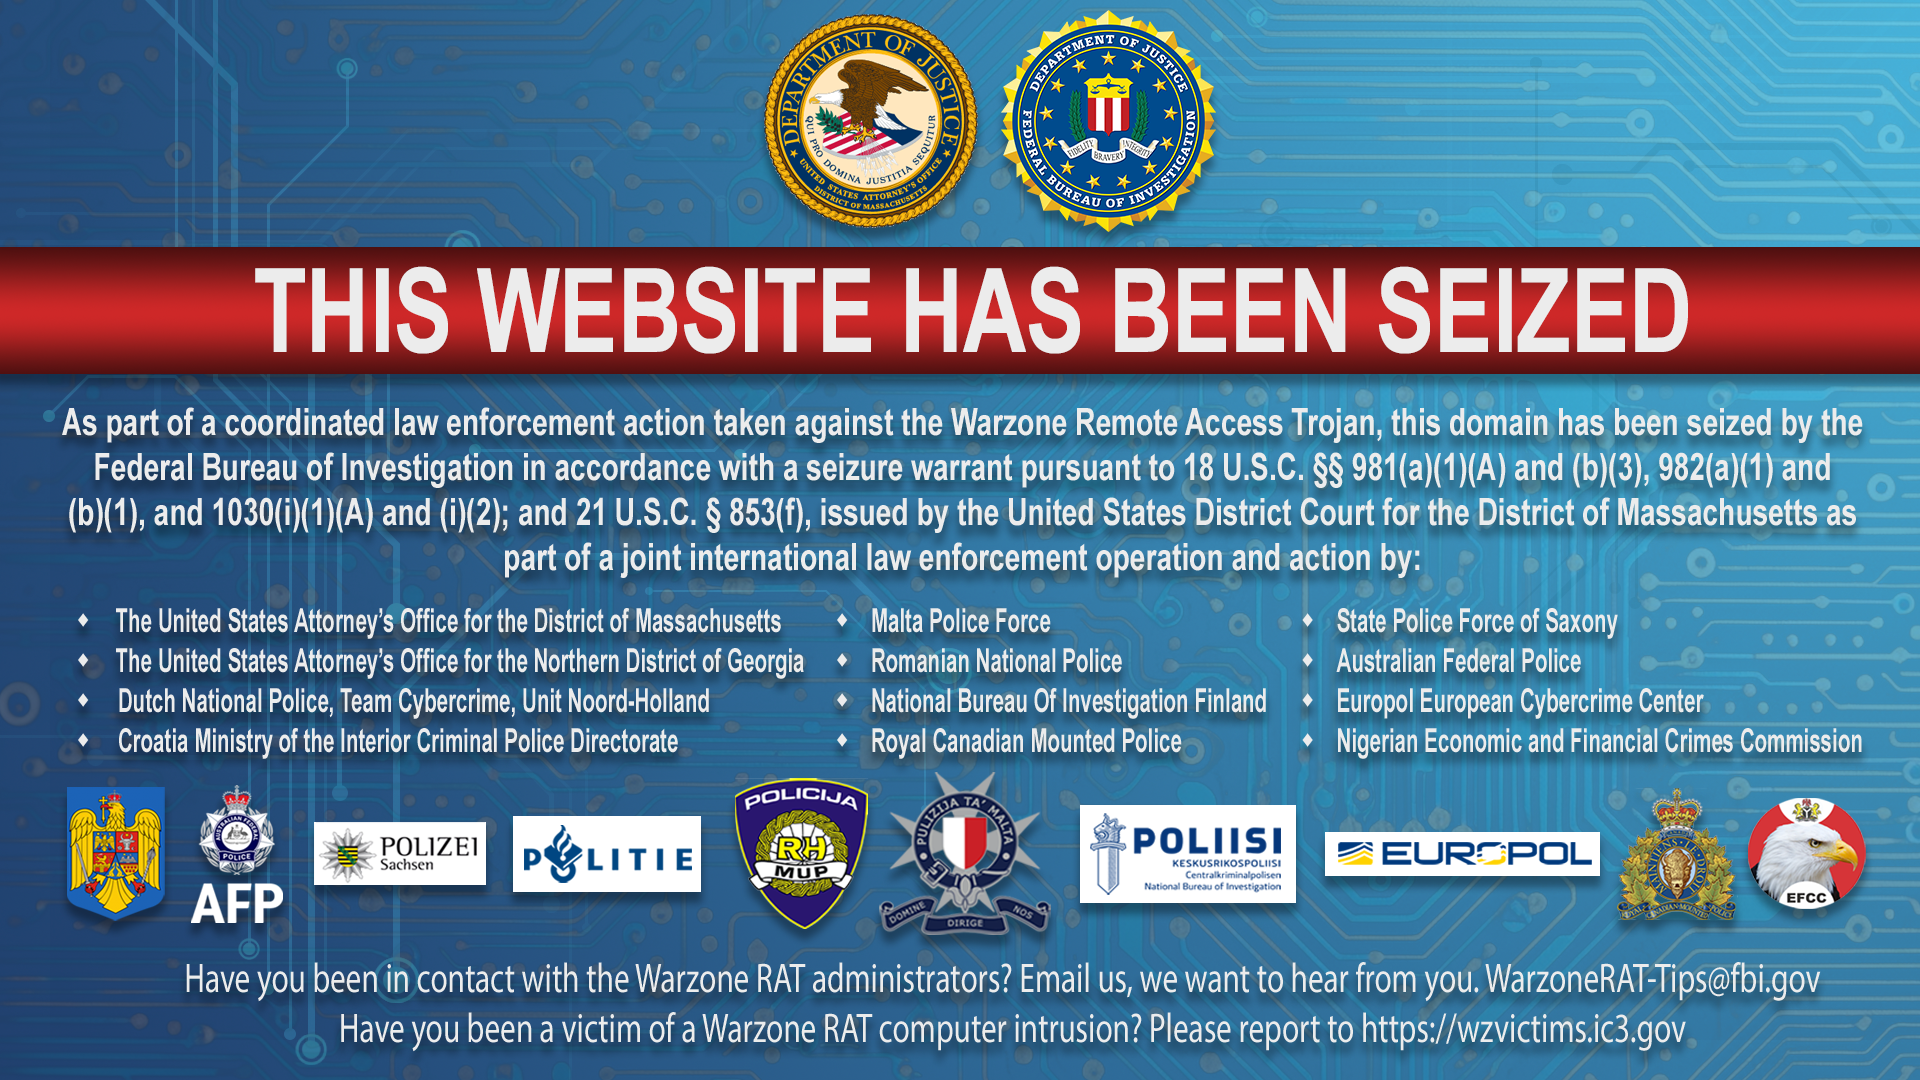 DOJ Seal and FBI Seal // This website has seized...Have you been a victim of a Warzone RAT computer intrusion? Please report to https://wzvictims.ic3.gov